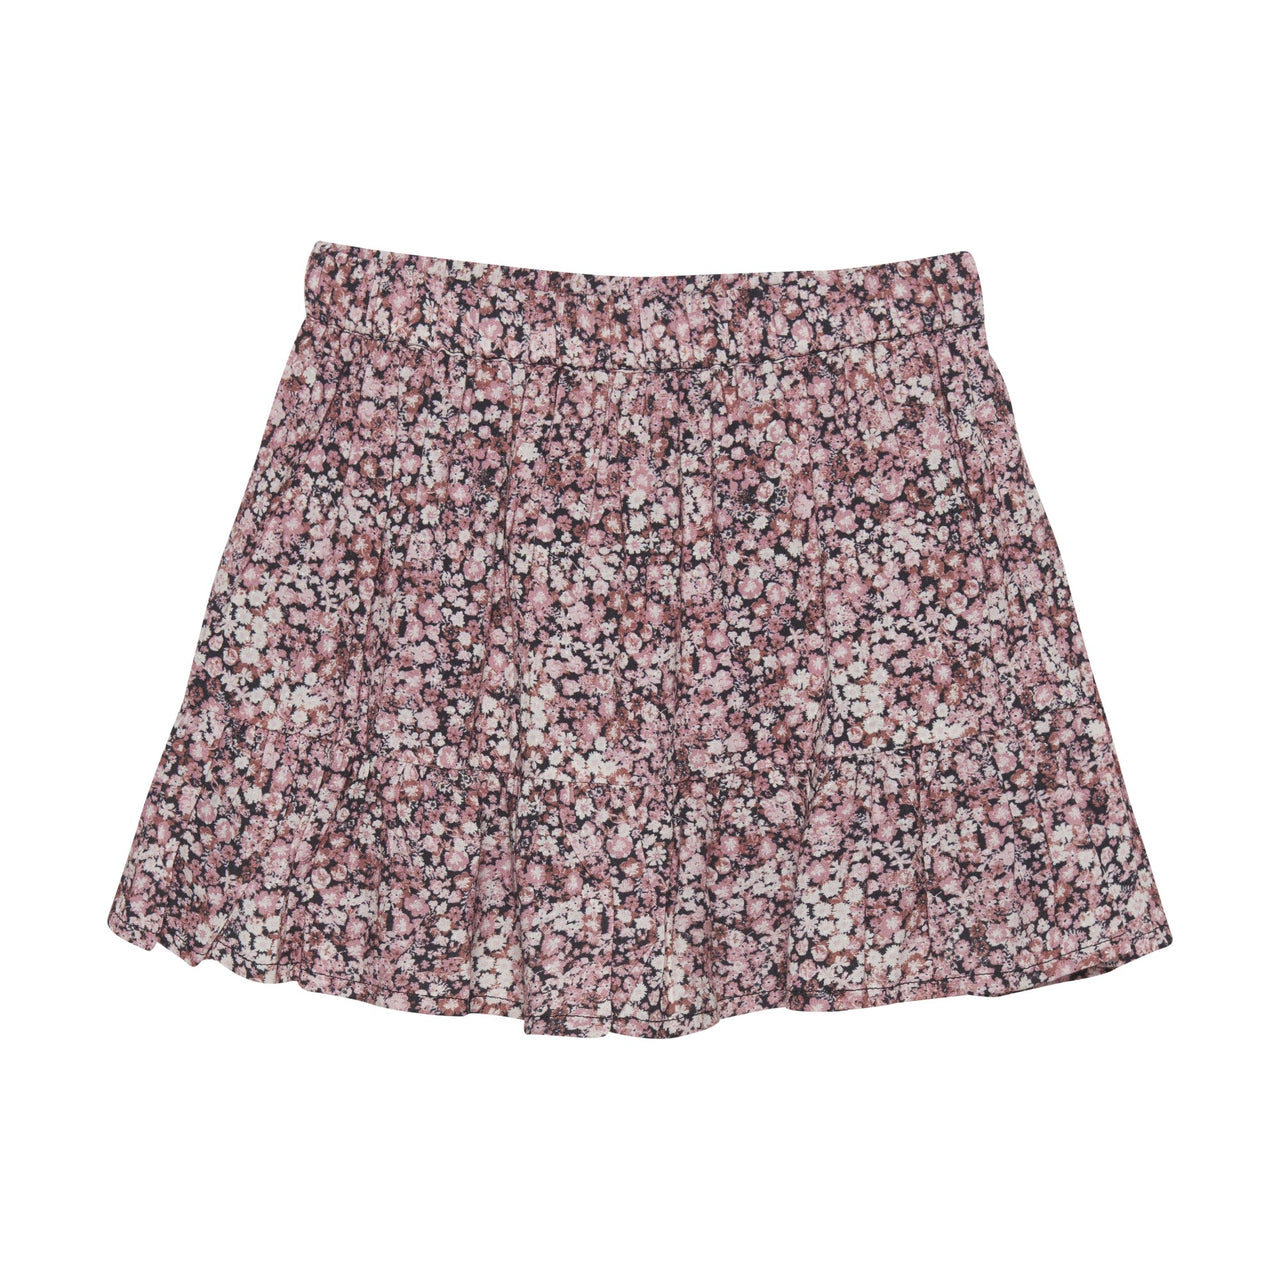 Small Floral Skirt